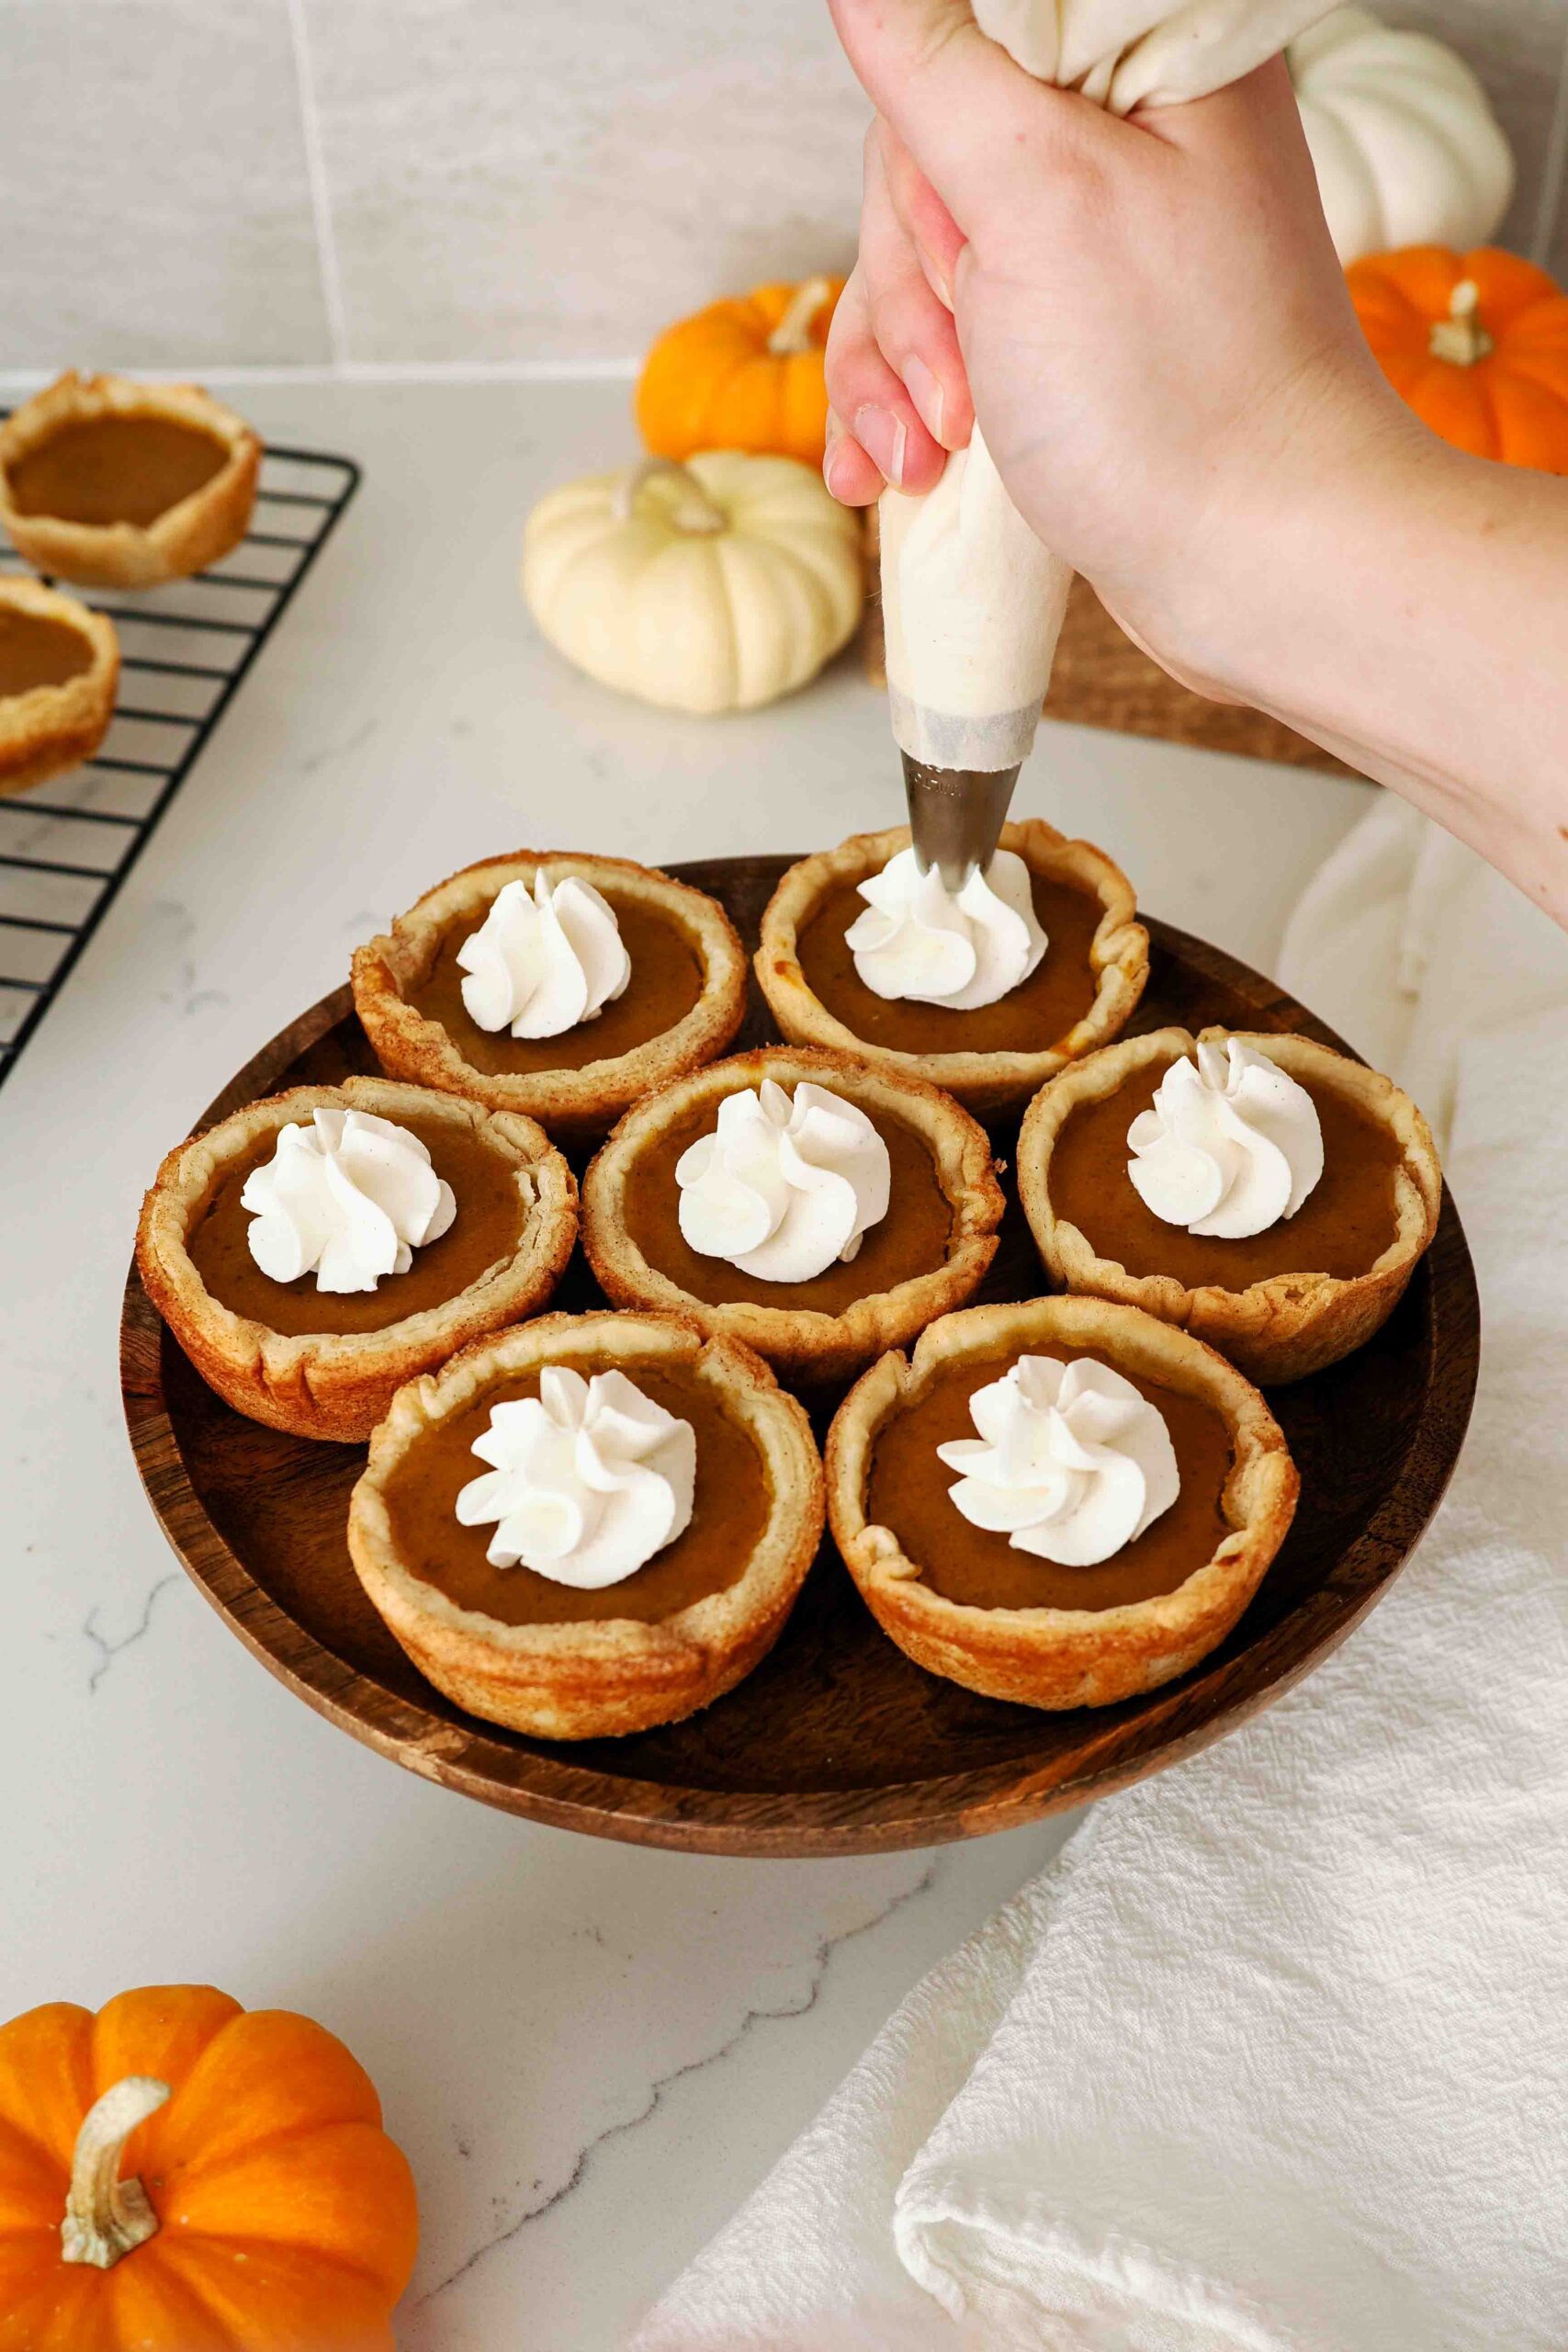 A hand pipes a dollop of whipped cream onto individual pumpkin pies.